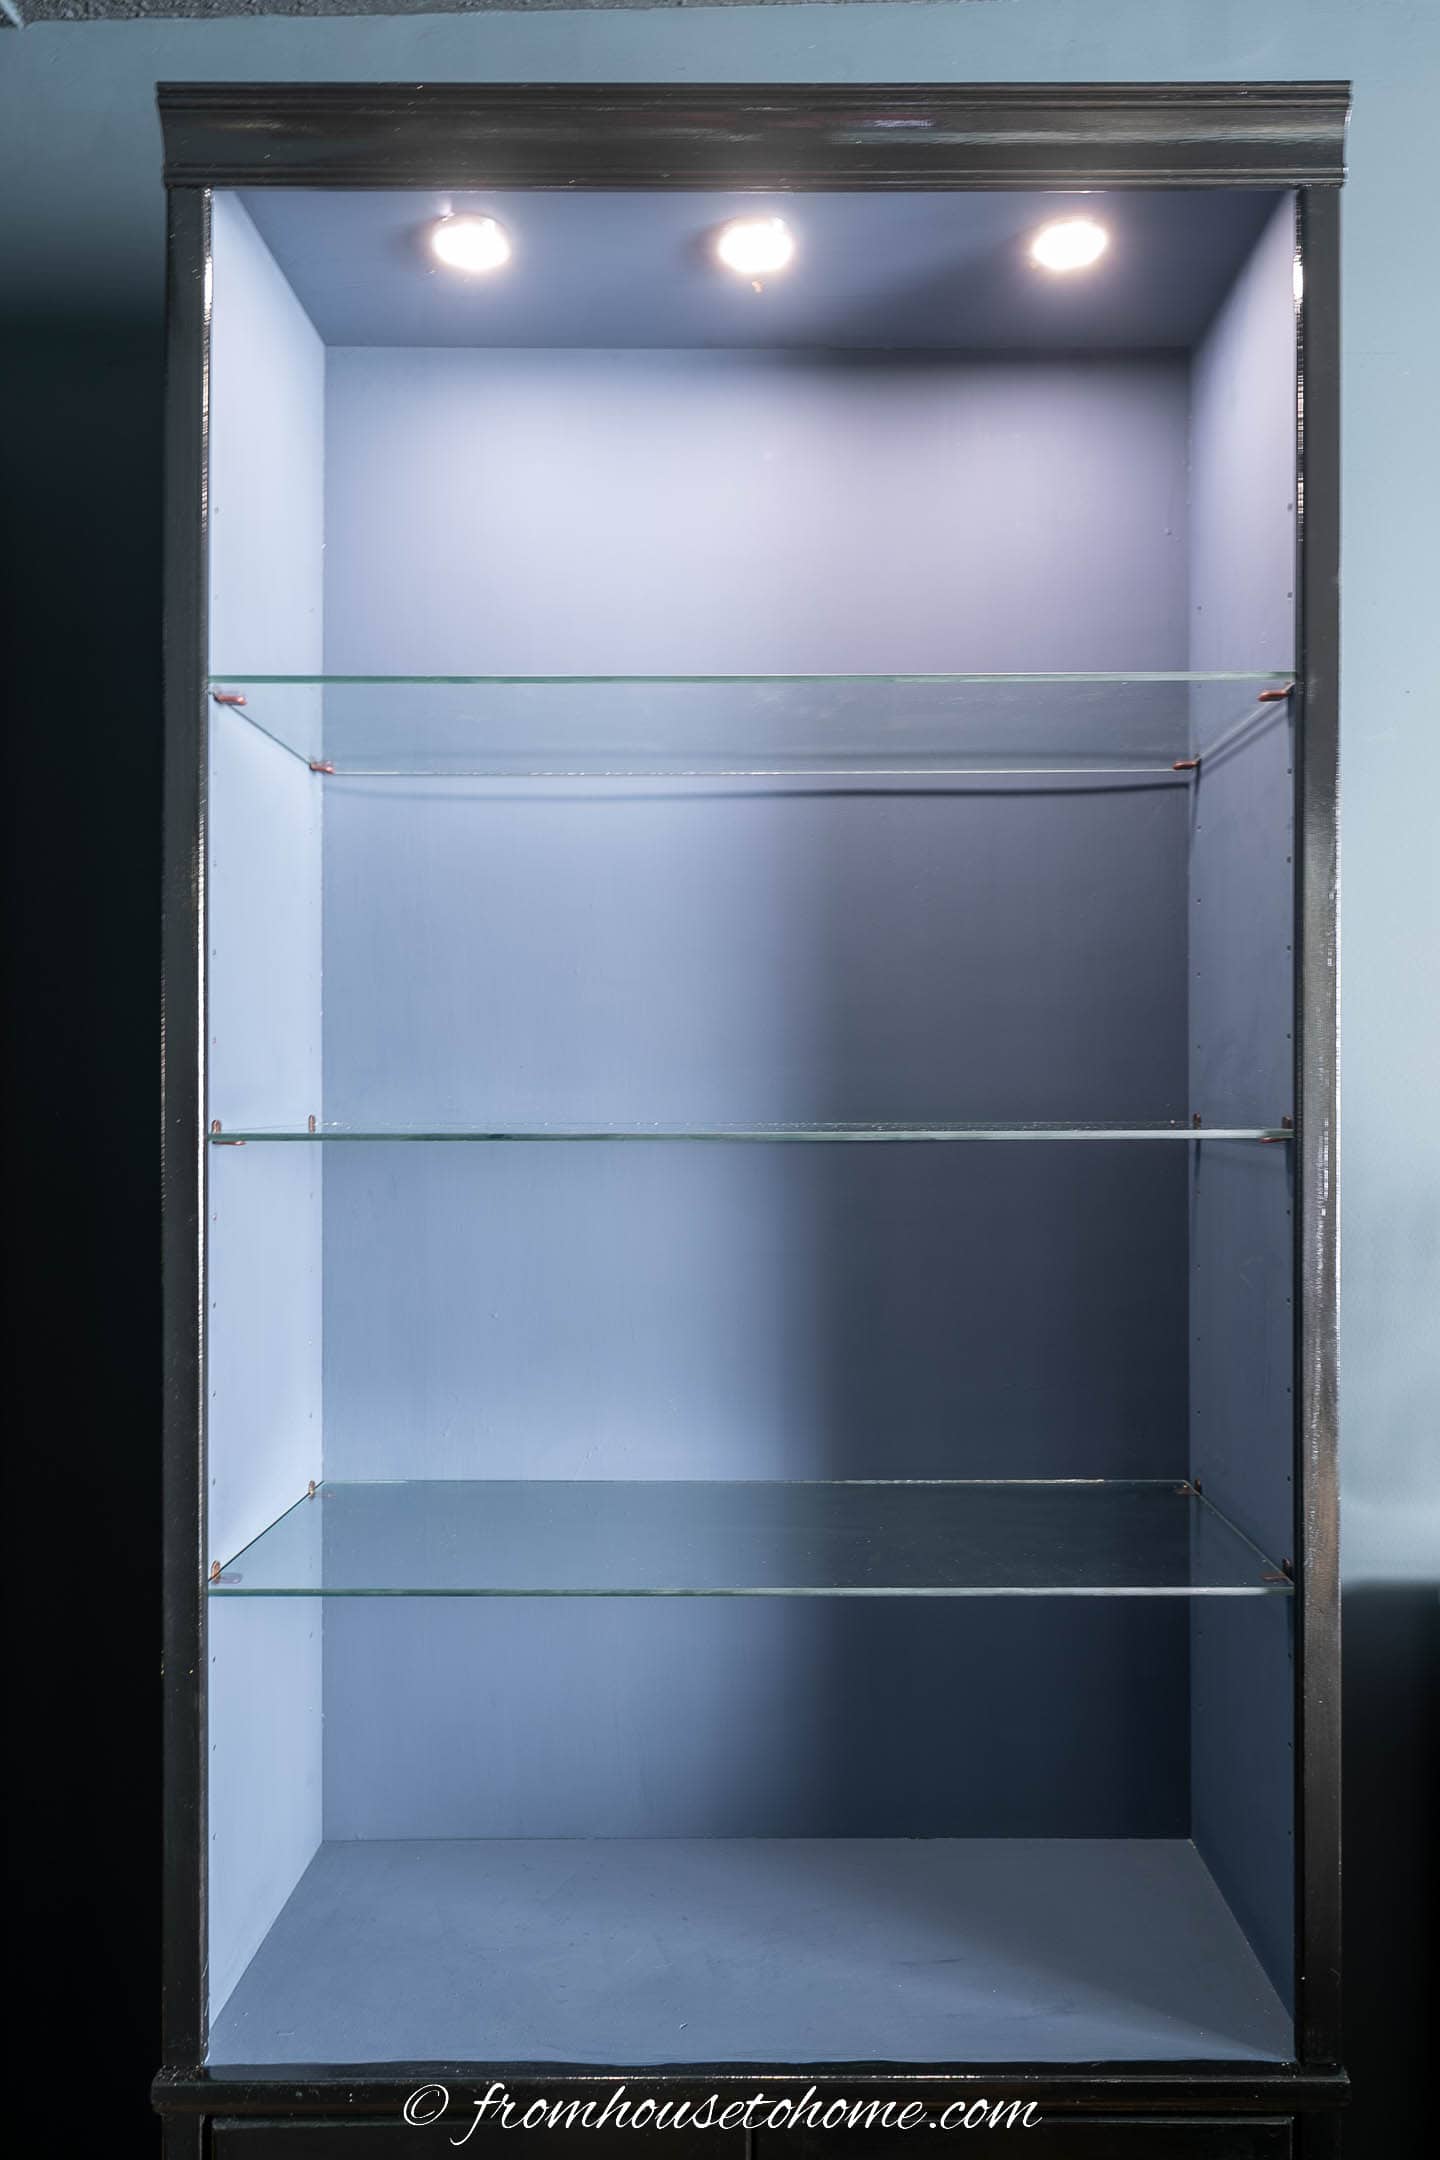 Puck lighting installed at the top of a bookcase with glass shelves